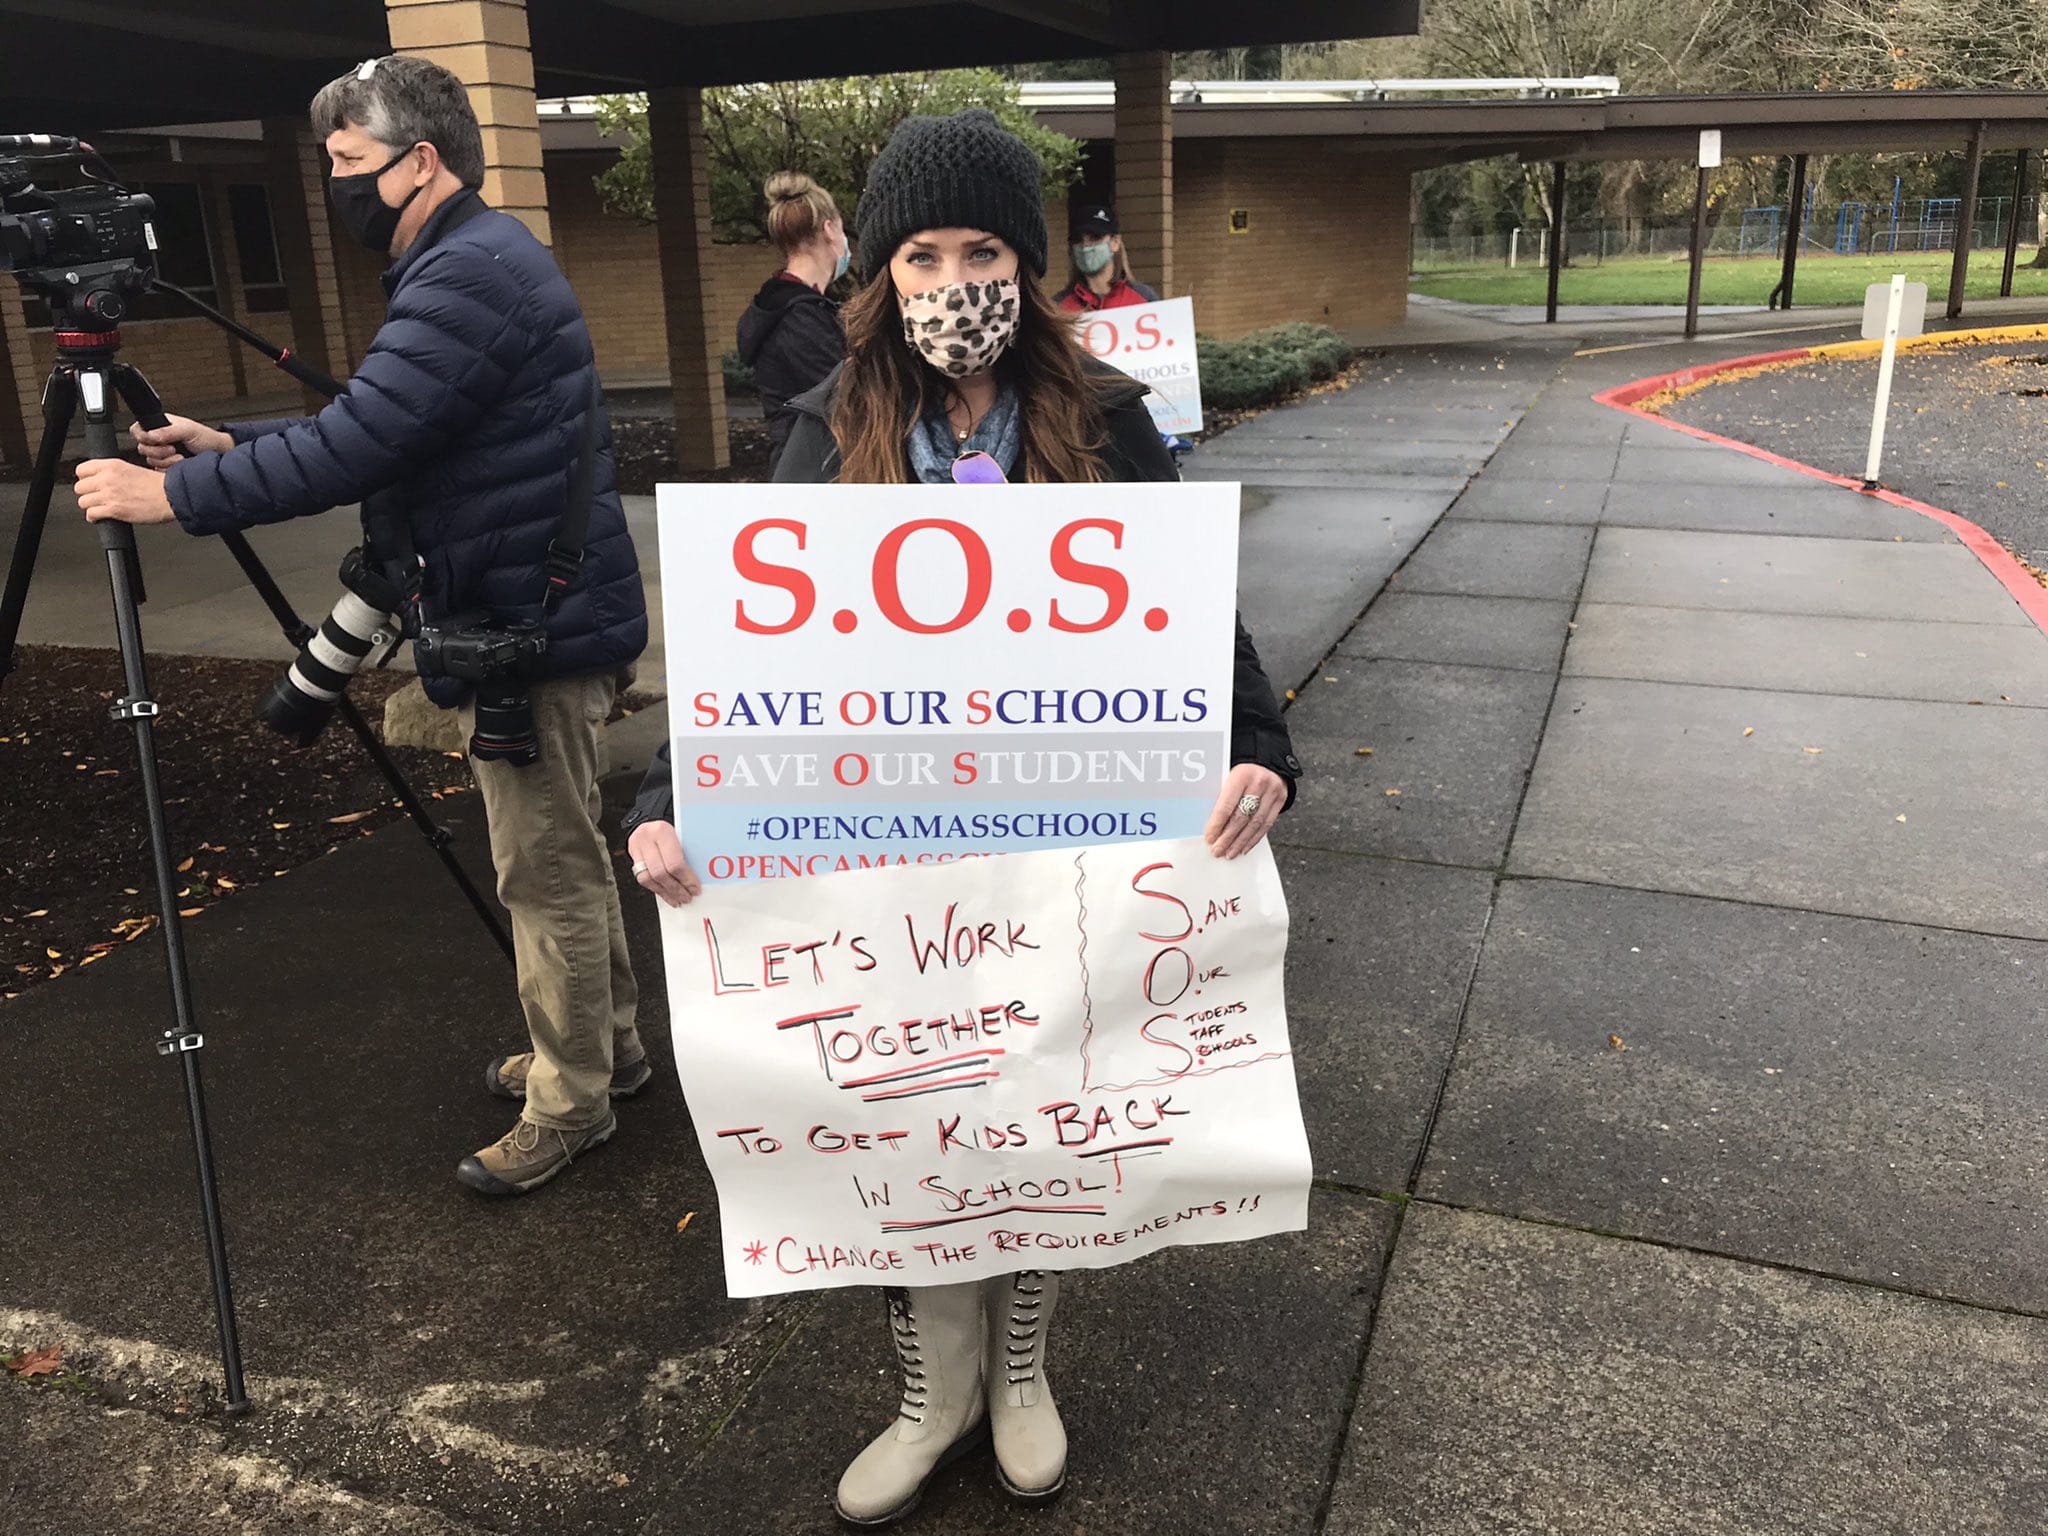 Andrea Seely has two children in the Camas School District. She says hundreds of people, concerned largely about teen suicide rates, have supported their cause.